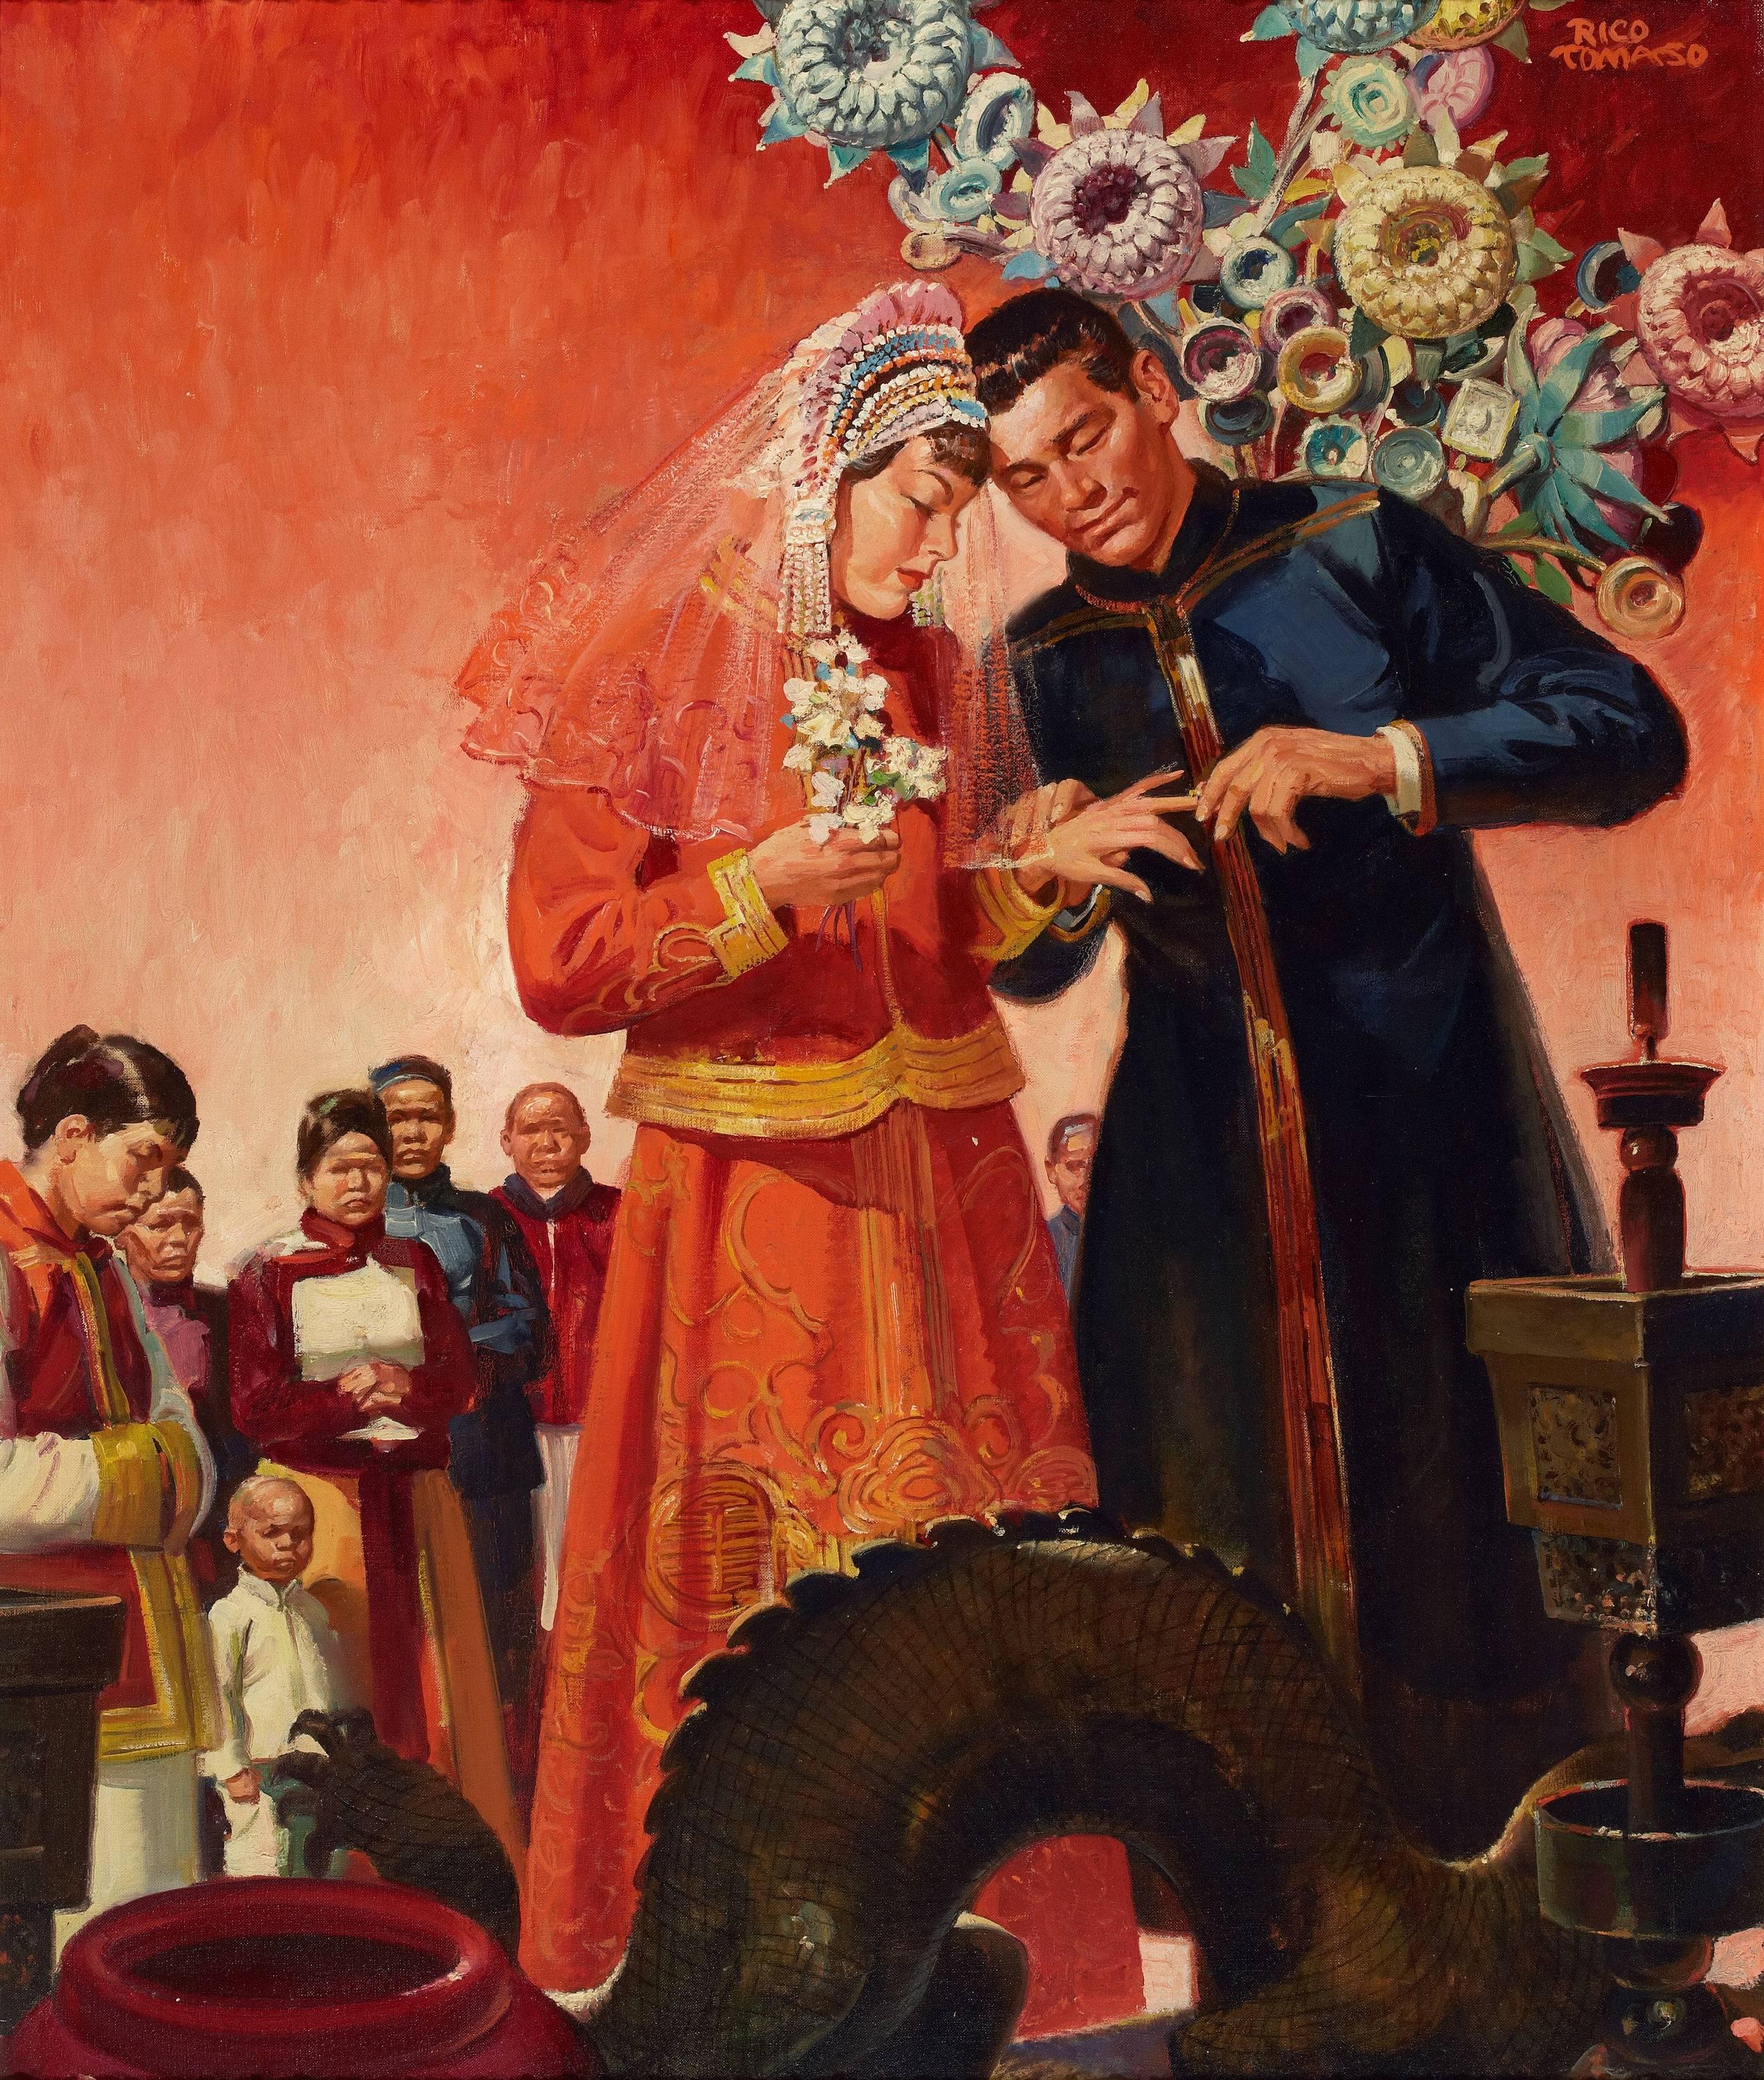 Asian Wedding - Painting by Rico Tomaso